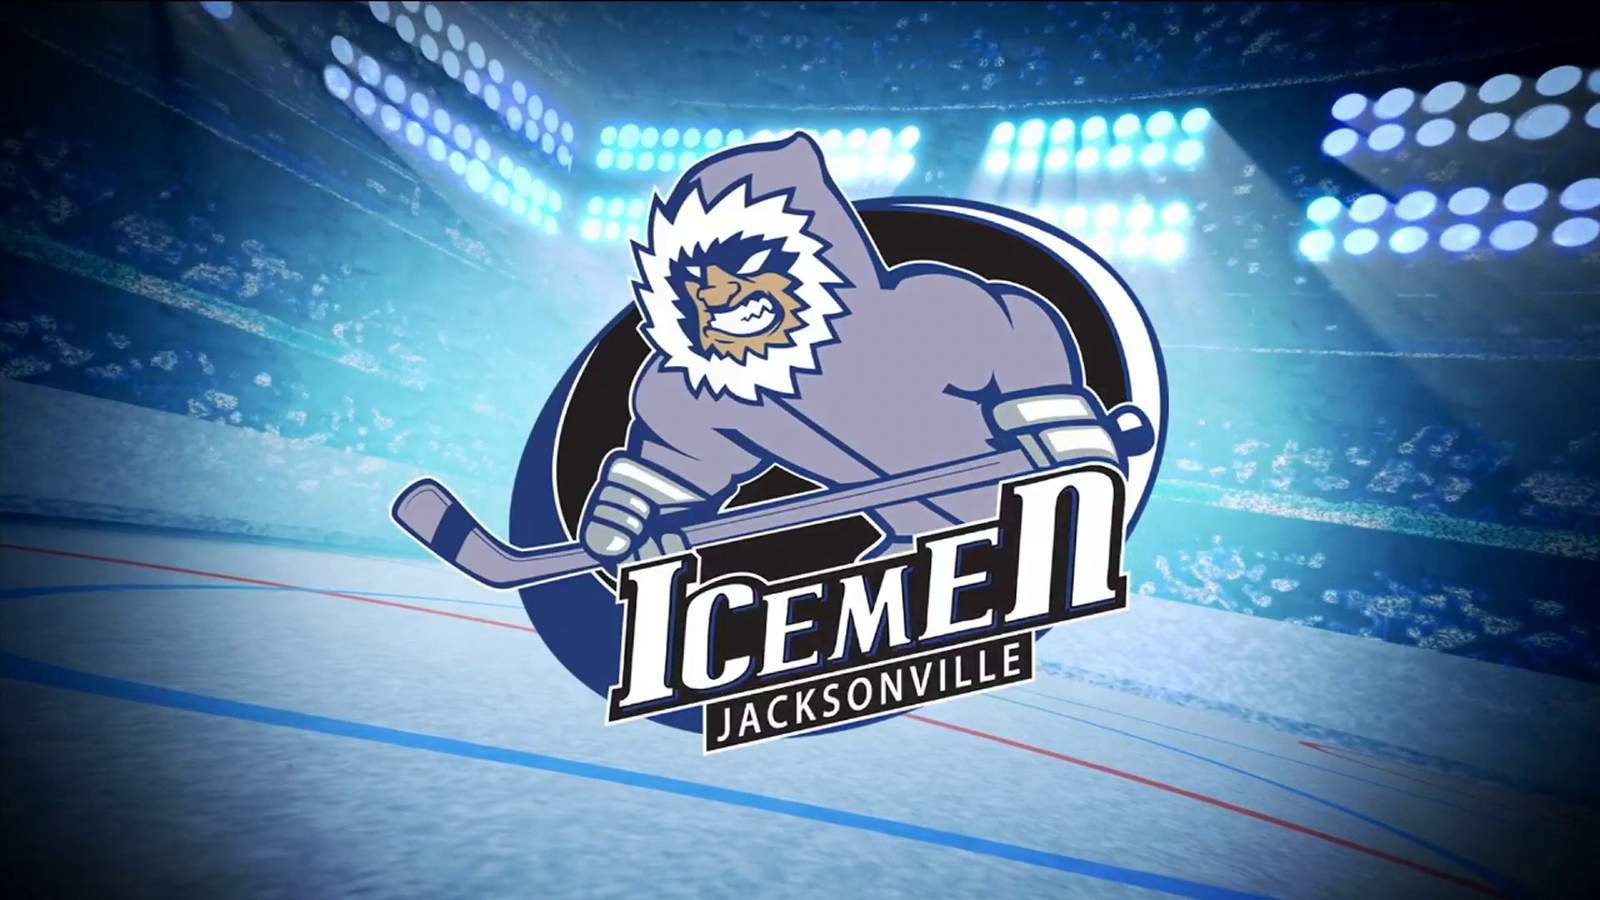 Icemen prepare for 4-game stretch against division rival